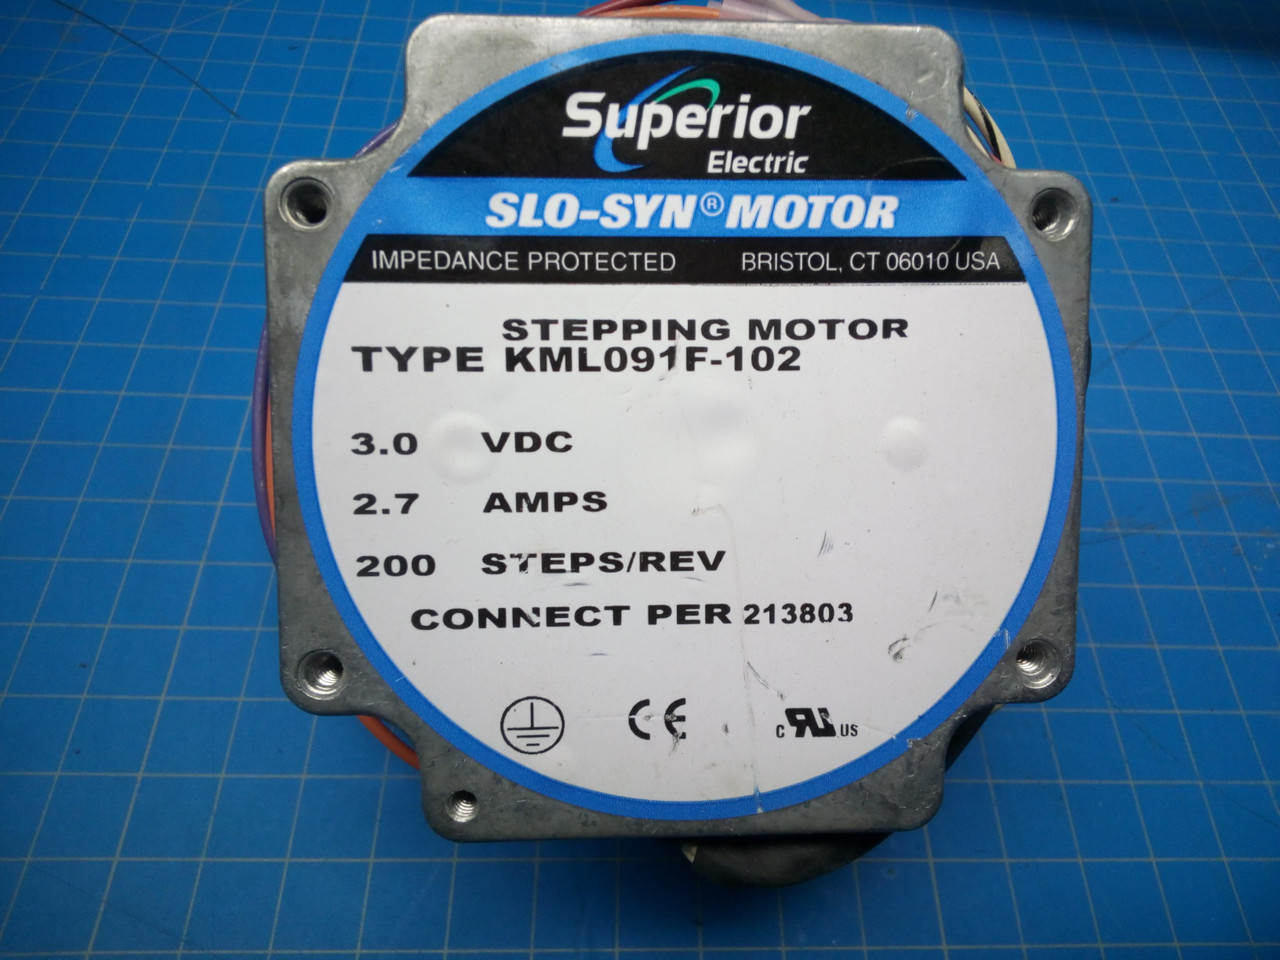 Superior Electric Stepping Motor 3.0 VDC 2.7 AMPS 200 STEPS P02-000864